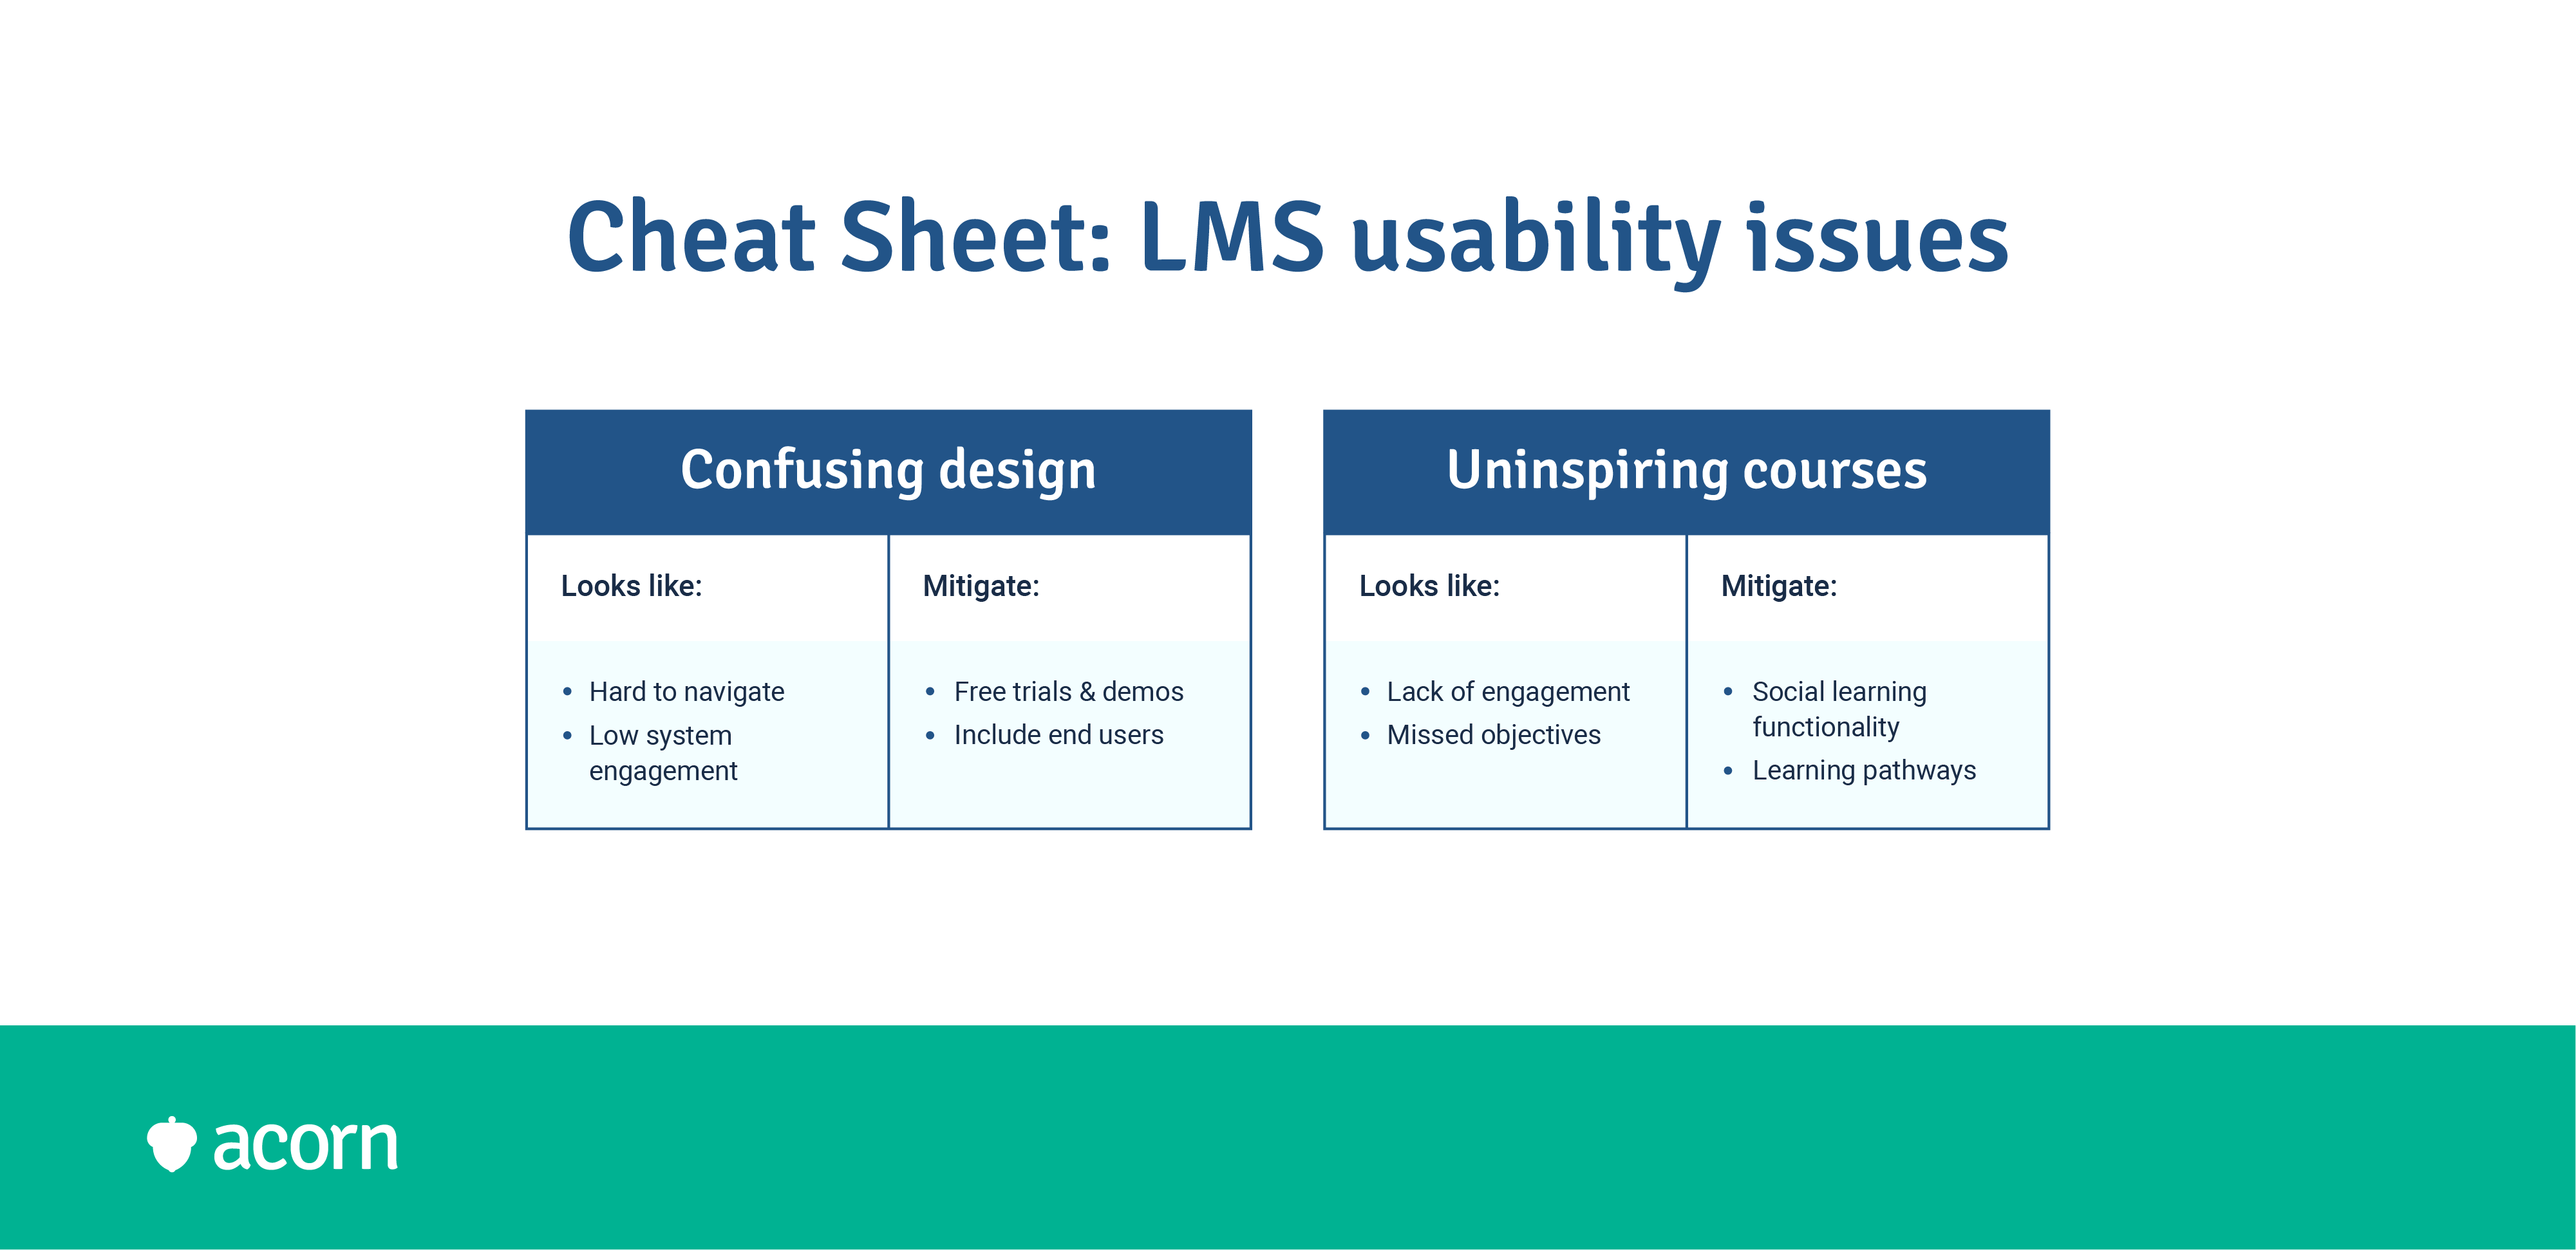 Tables outlining the usability issues associated with LMSs and how to mitigate them.